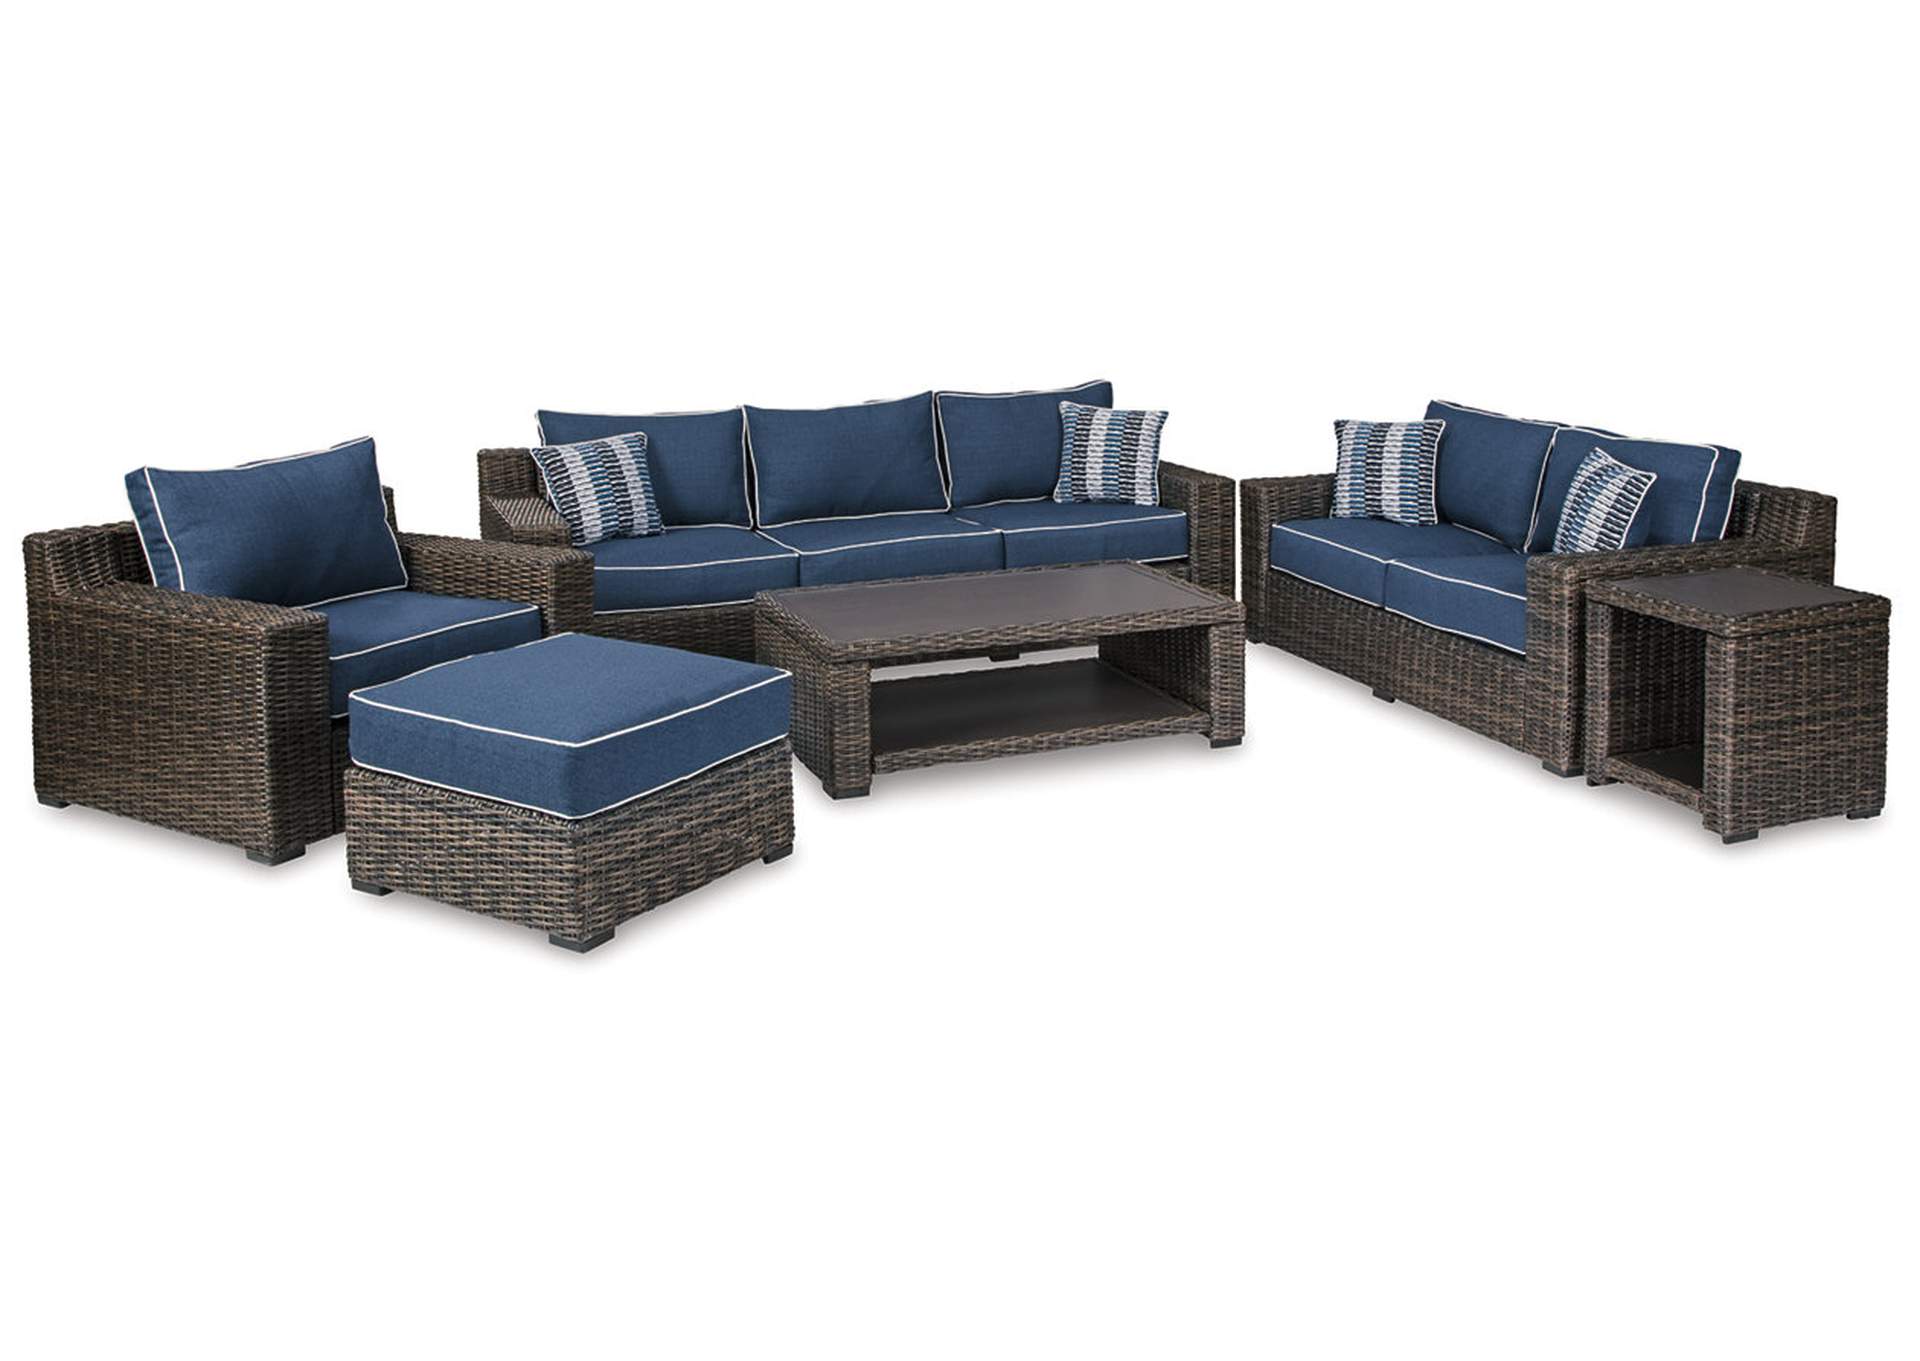 Grasson Lane Outdoor Sofa, Loveseat, Lounge Chair and Ottoman with Coffee Table and End Table